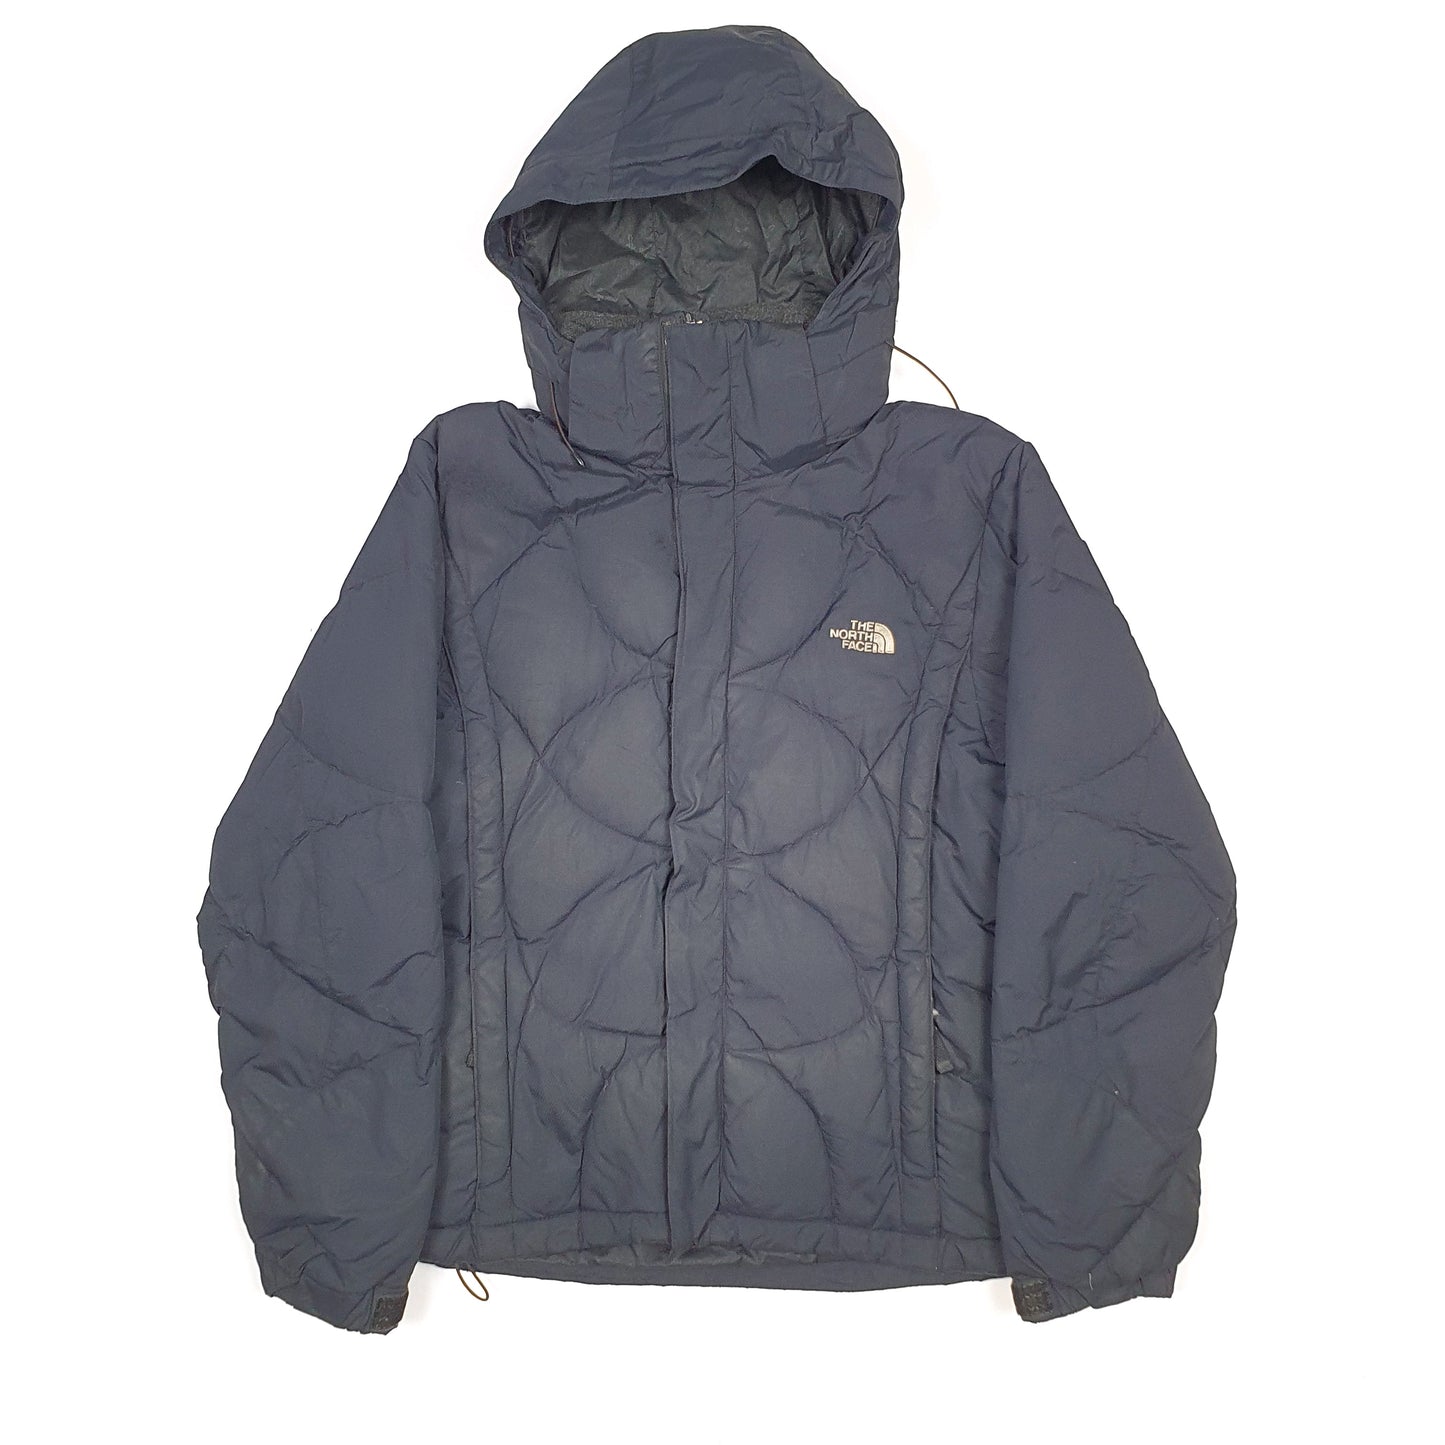 Navy The North Face Puffer Jacket Coat